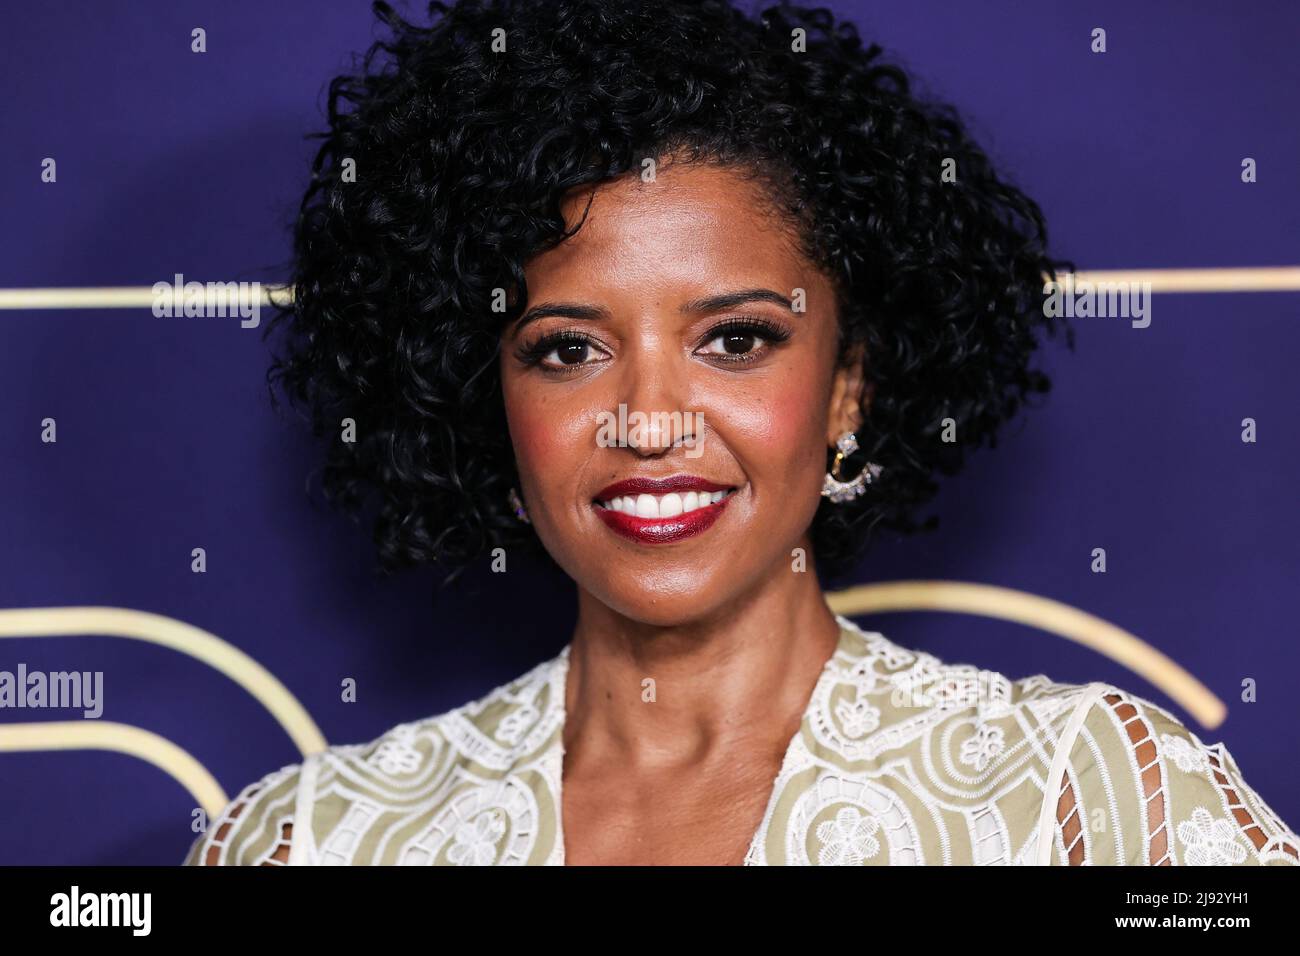 Hollywood, United States. 19th May, 2022. HOLLYWOOD, LOS ANGELES, CALIFORNIA, USA - MAY 19: American actress Renée Elise Goldsberry (Renee Elise Goldsberry) arrives at NBCUniversal's FYC Event For 'Girls5eva' held at the NBCU FYC House on May 19, 2022 in Hollywood, Los Angeles, California, United States. (Photo by Xavier Collin/Image Press Agency) Credit: Image Press Agency/Alamy Live News Stock Photo